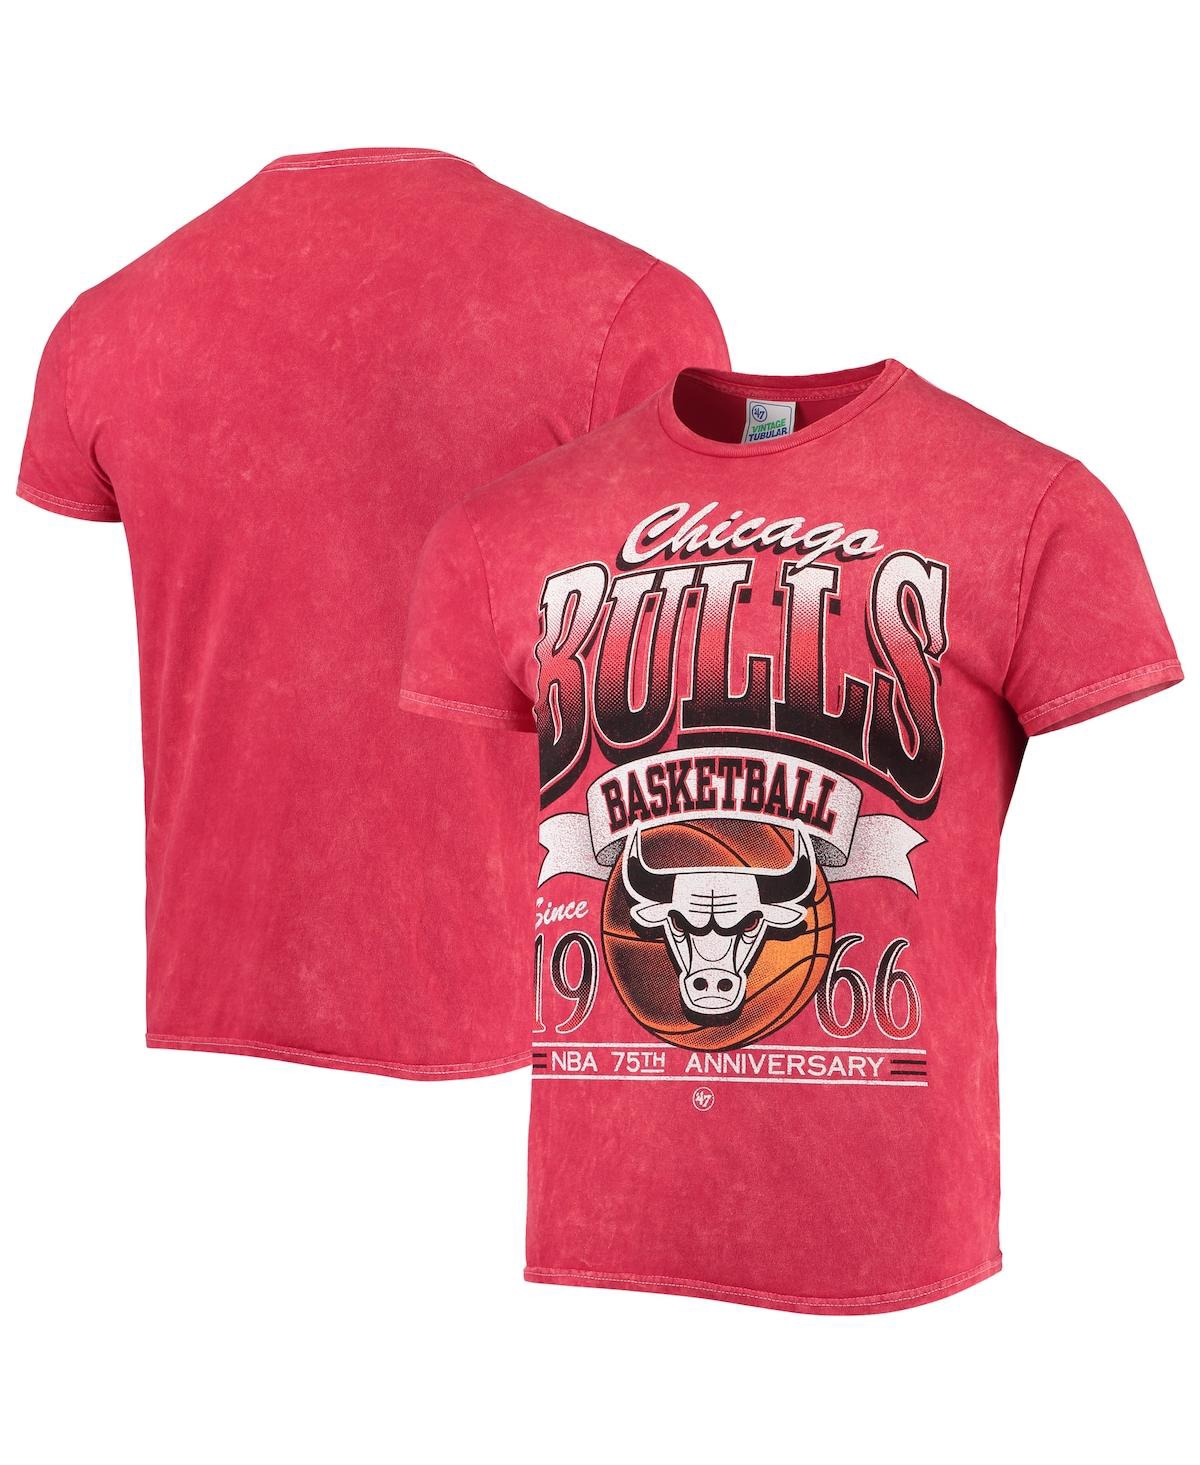 47 Brand Men's '47 Red Chicago Bulls 75th Anniversary City Edition Mineral Wash Vintage-look Tubular T-shirt